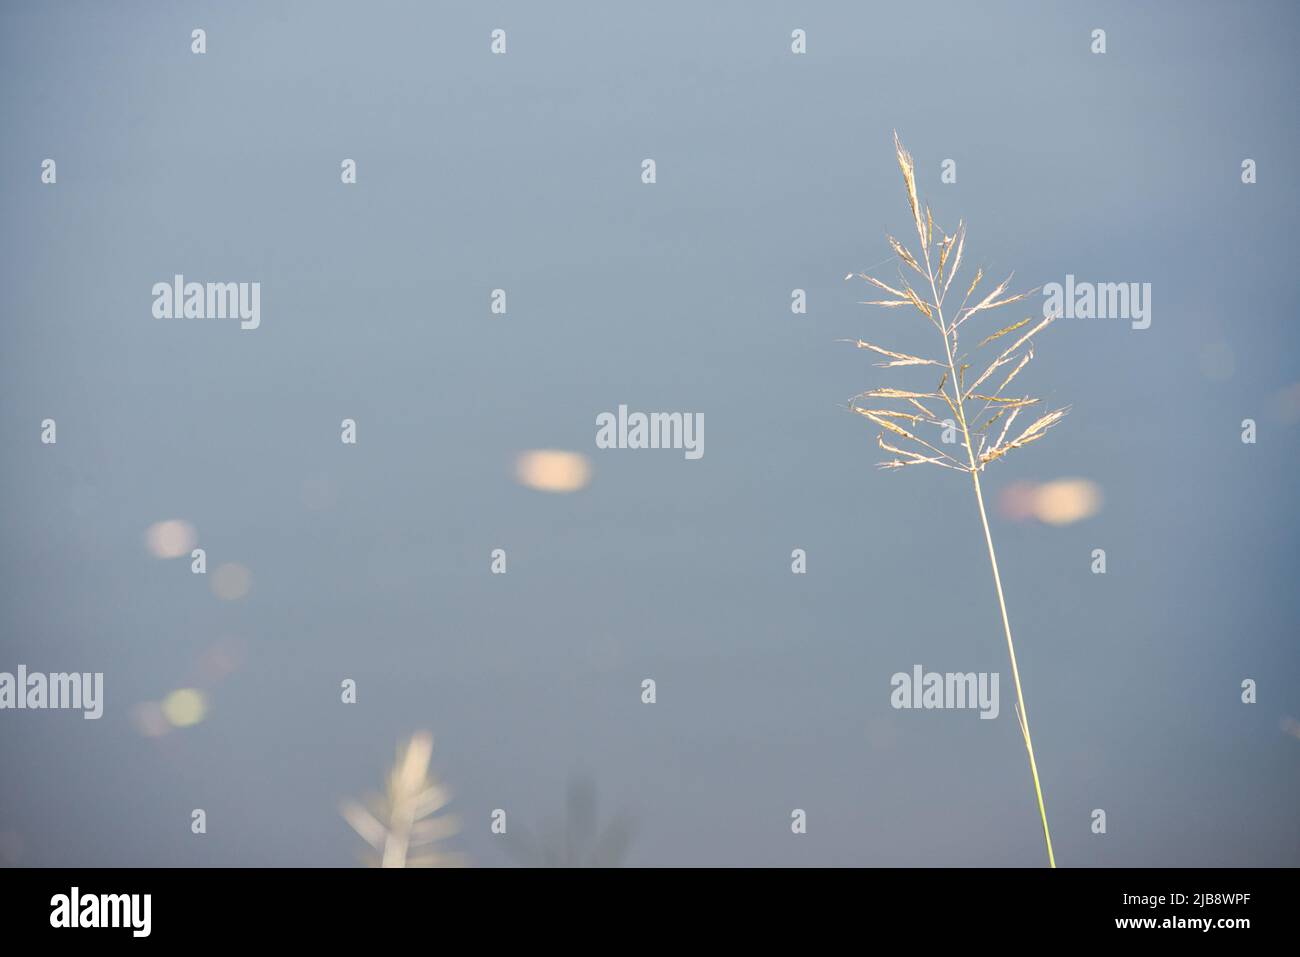 Strands of grass near a water body in a tropical forest Stock Photo